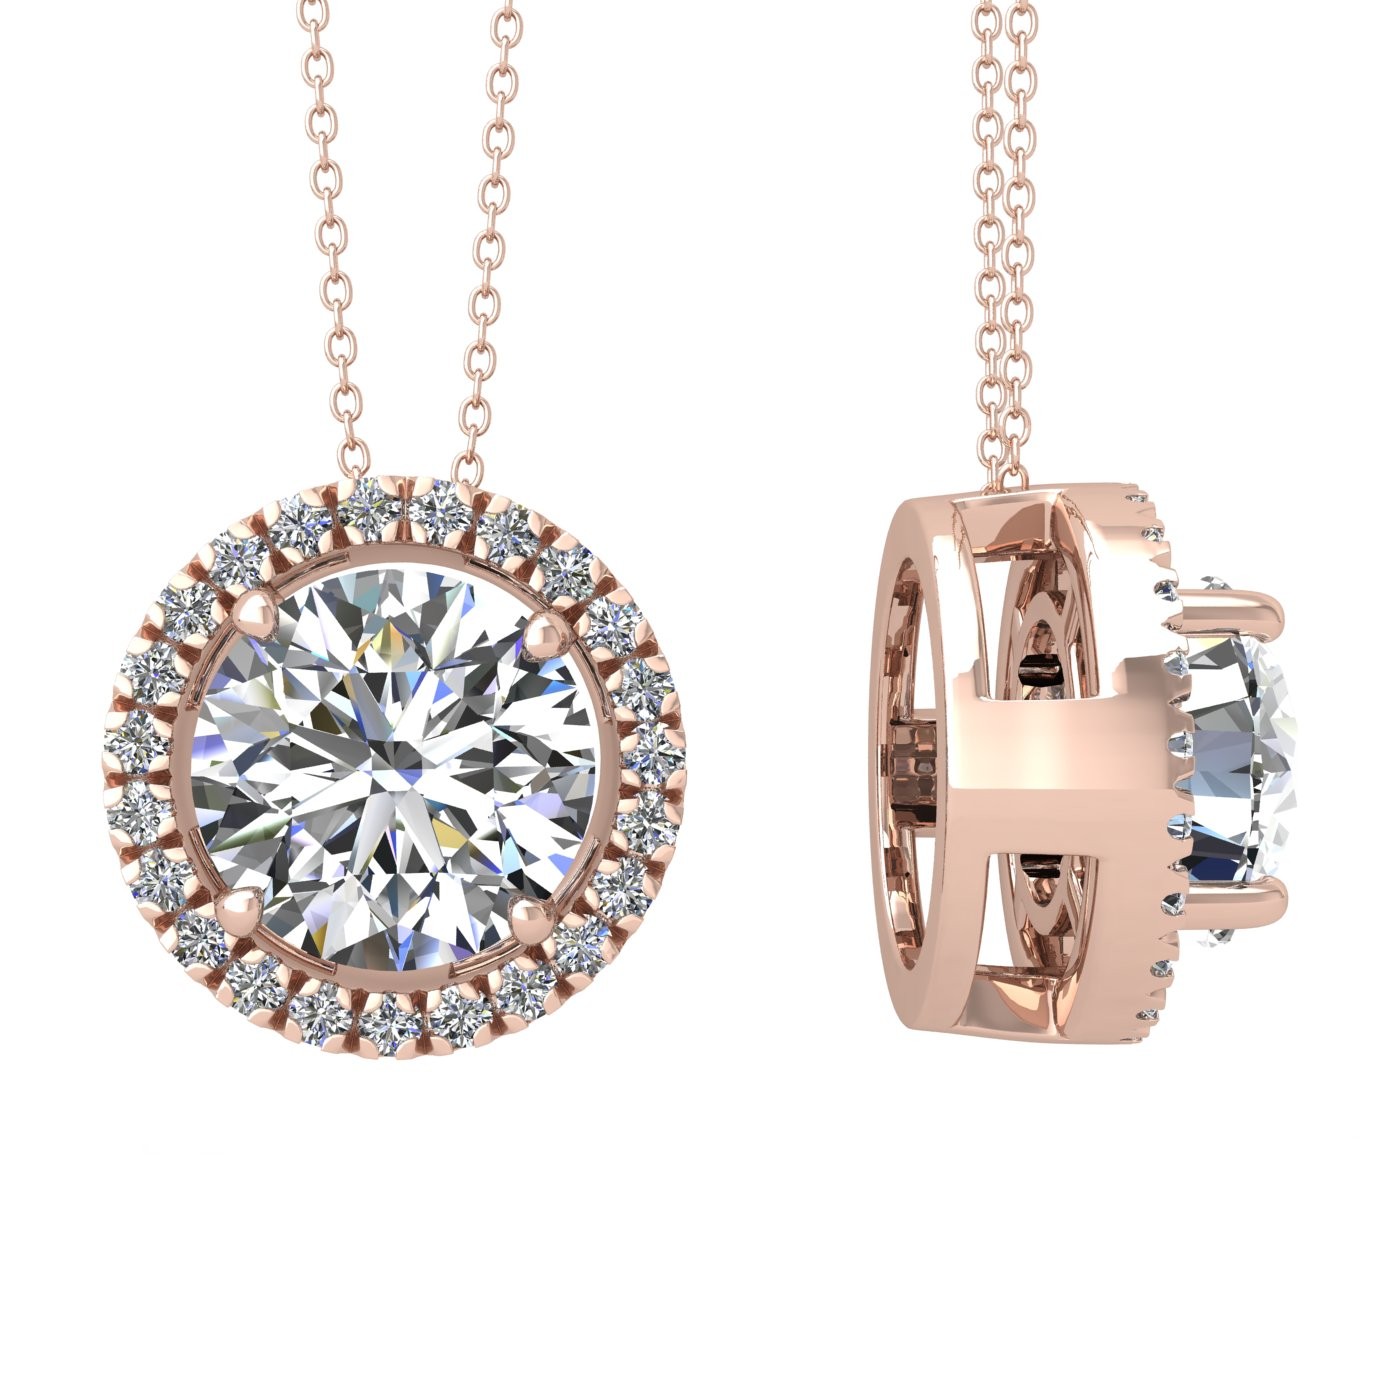 18k rose gold 1,5 ct 4 prong round shape diamond pendant with diamond pavÉ set halo including chain seperate from the pendant